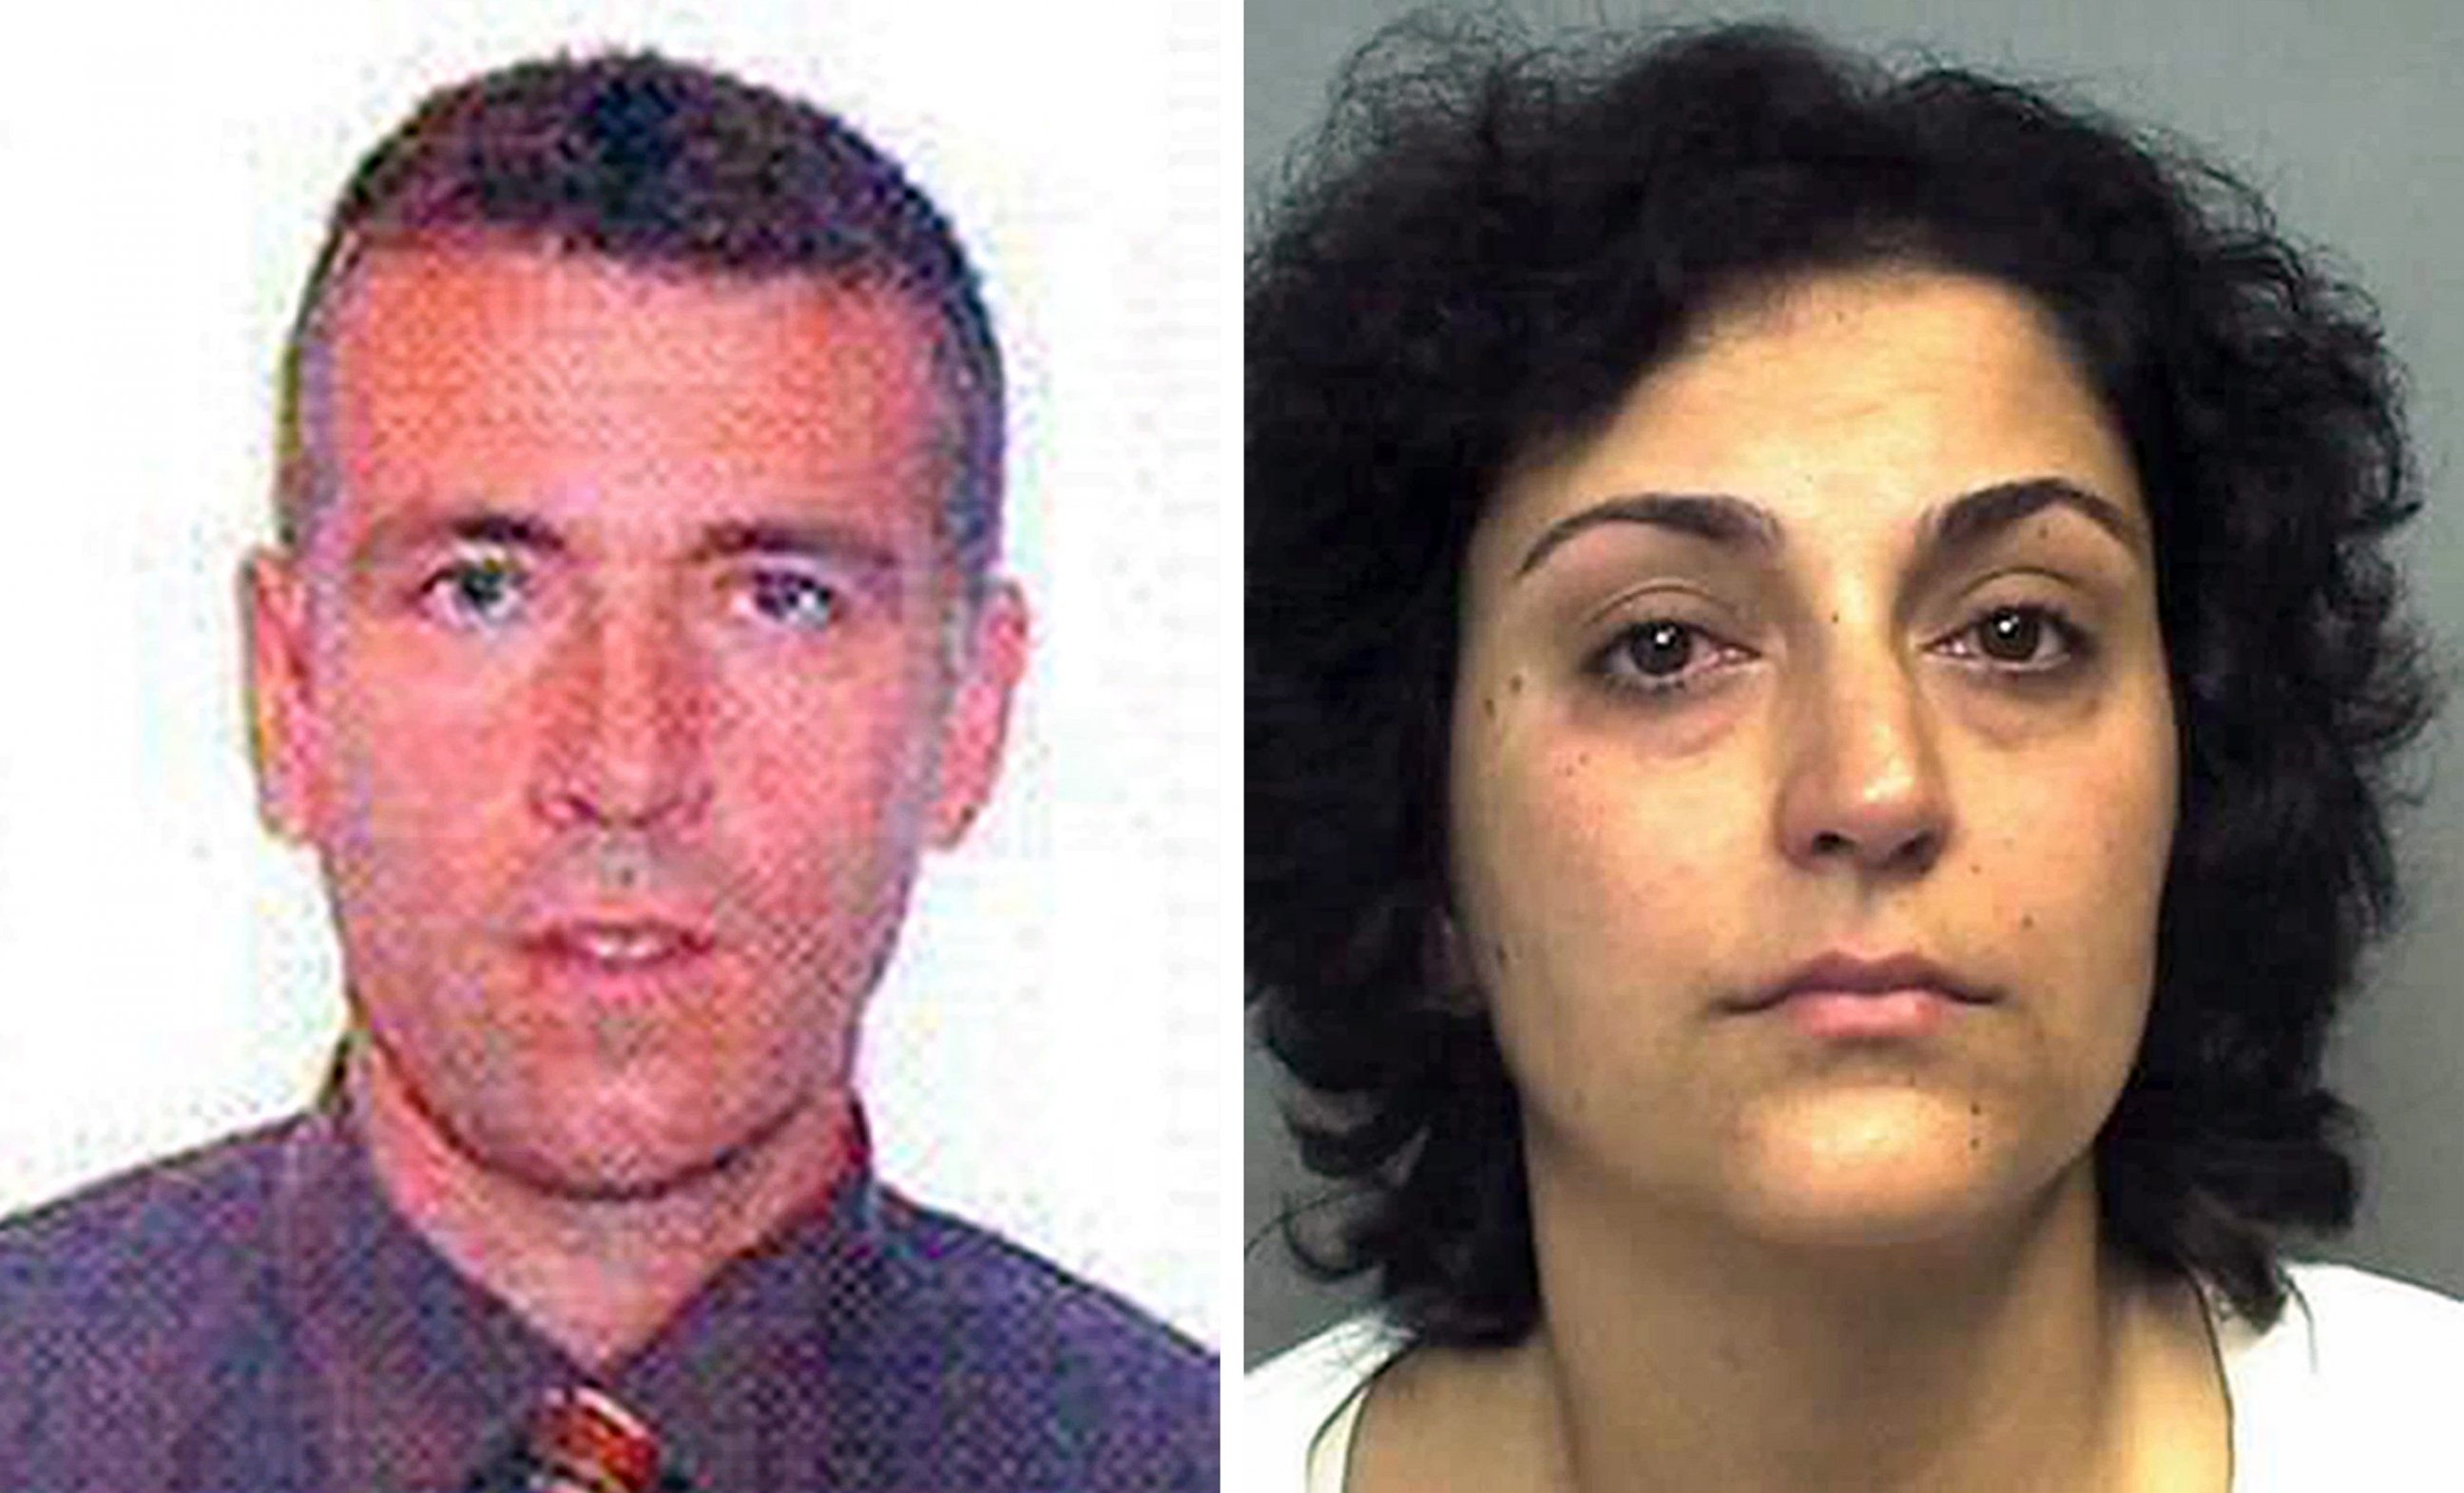 PHOTO: Undated handout photos issued by police on Sept. 1, 2014, show Brett King and Naghemeh King, the parents of Ashya King, who took the five-year-old brain cancer patient out of hospital without doctors' consent.